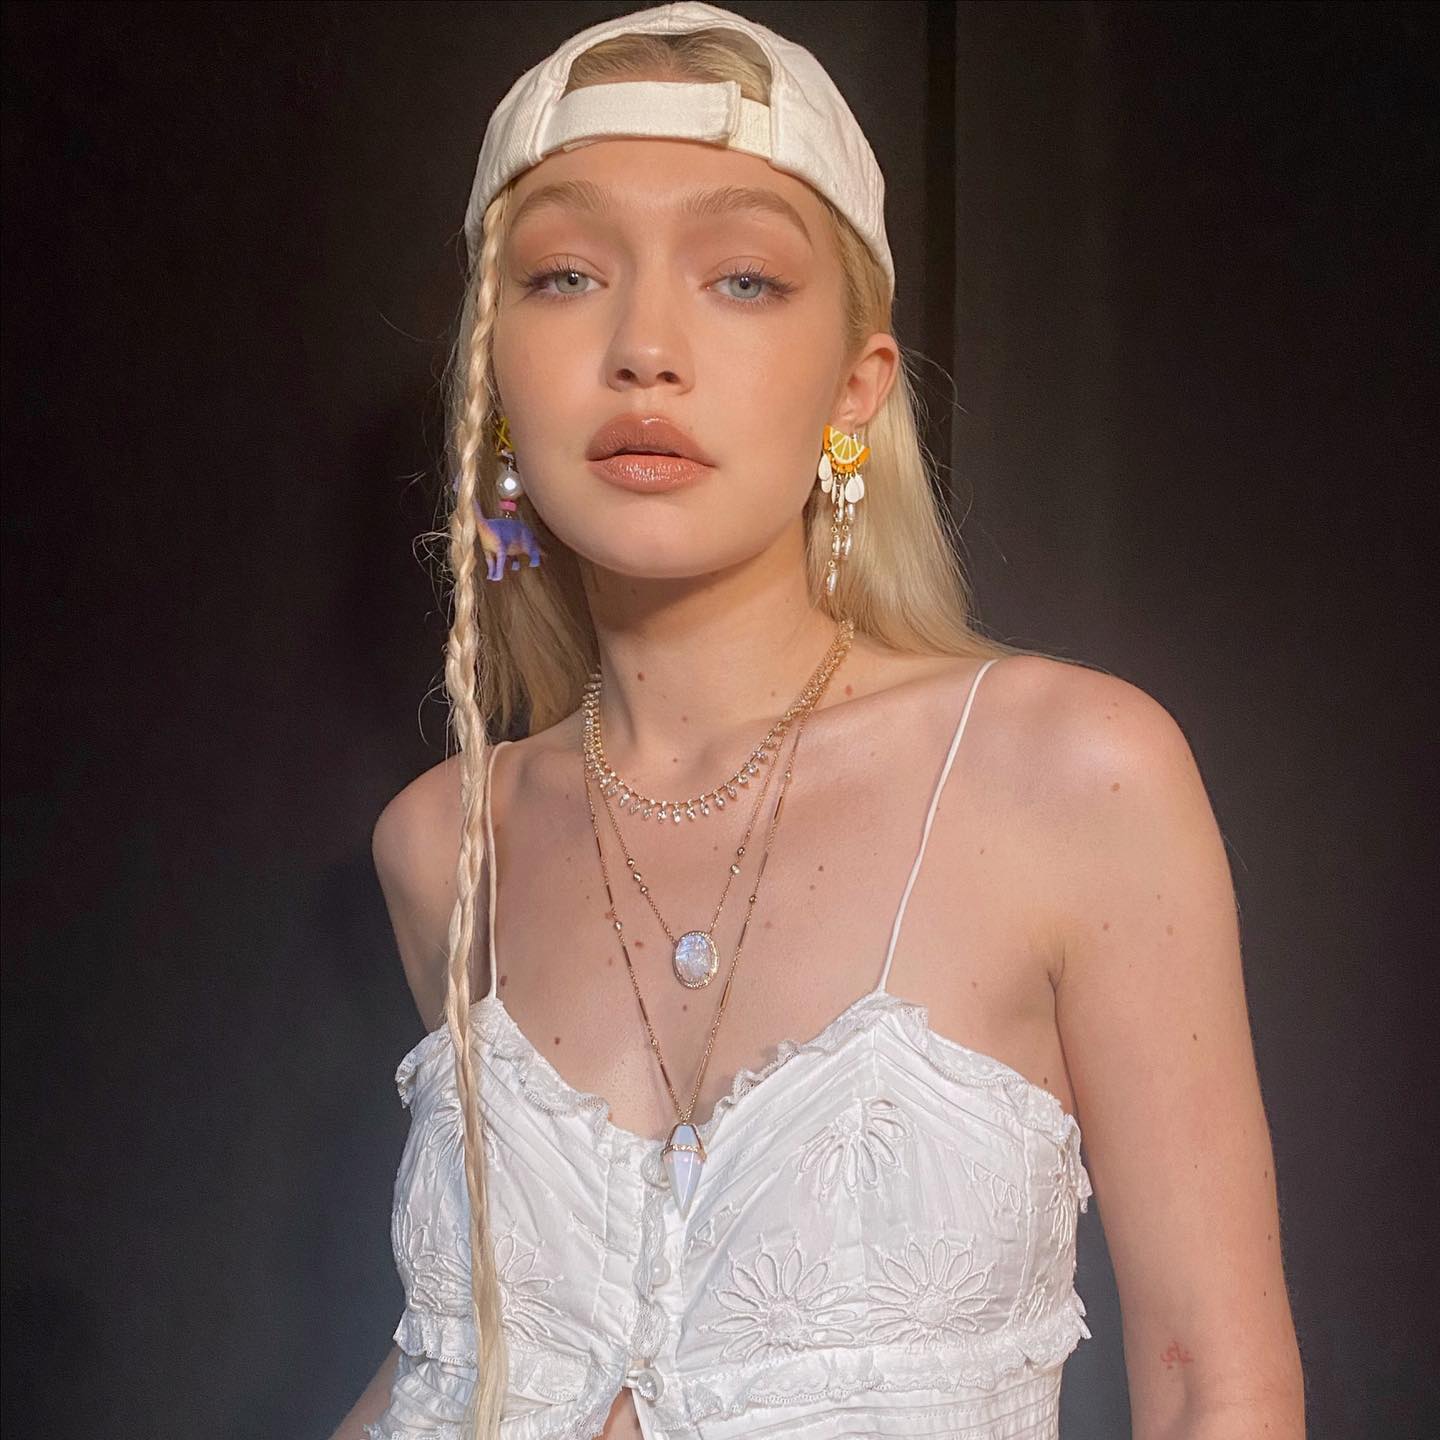 Meet Guest In Residence - Gigi Hadid’s New Fashion Line